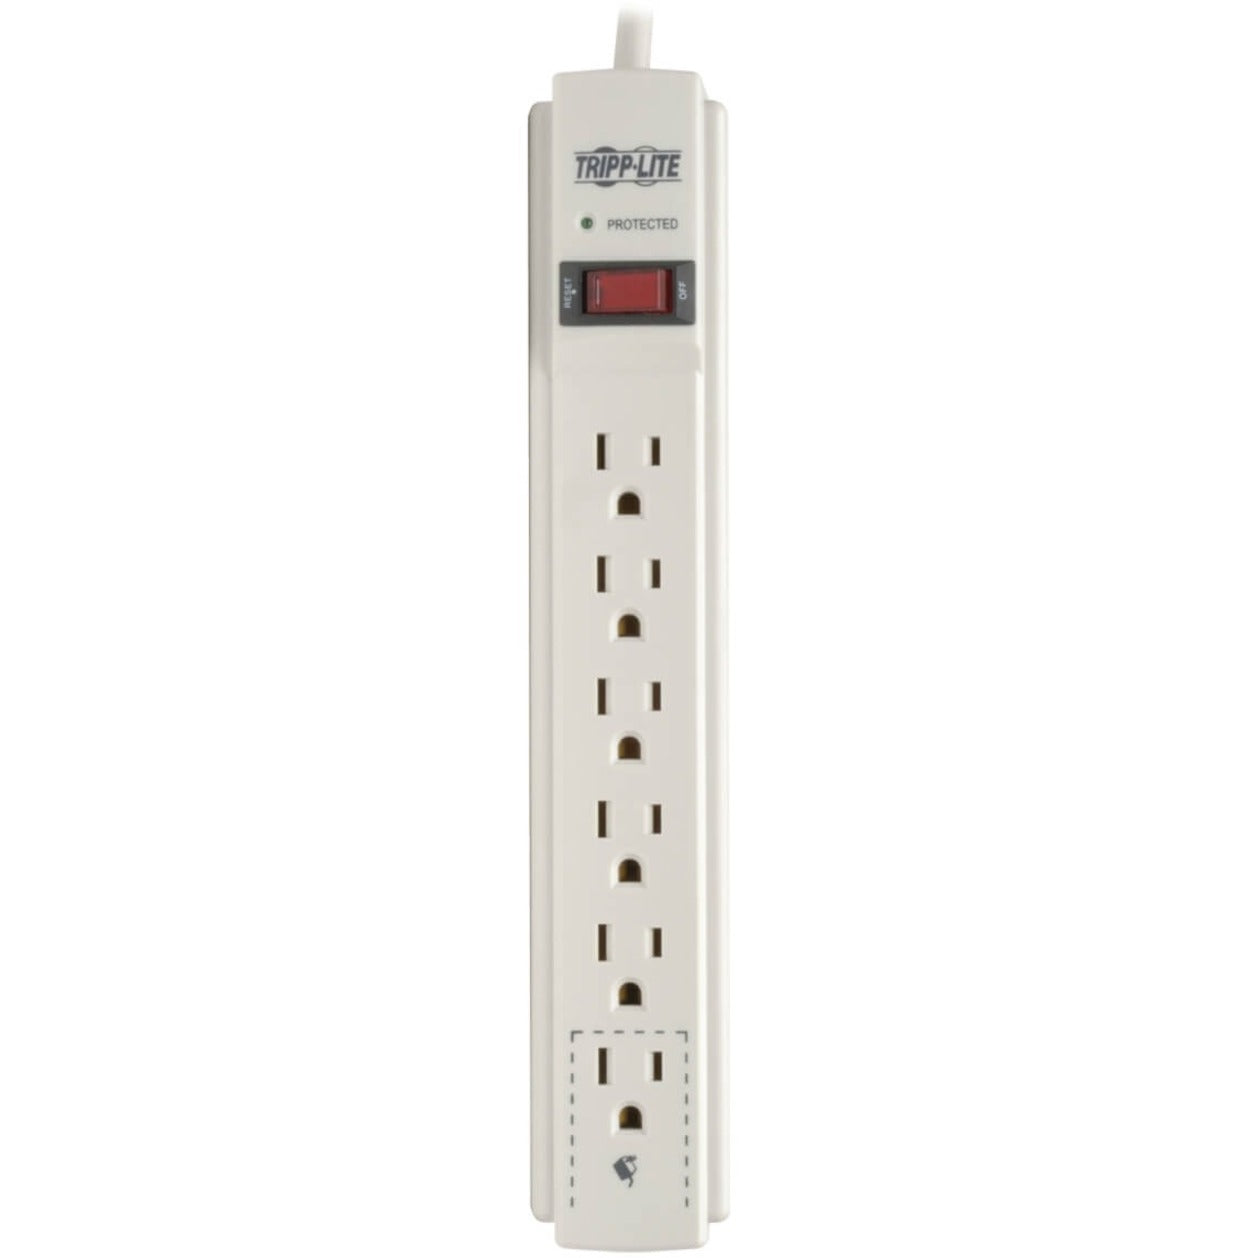 Tripp Lite TLP606 Protect It! 6-Outlet Economy Surge Protector, 790 Joules, 6' Cord